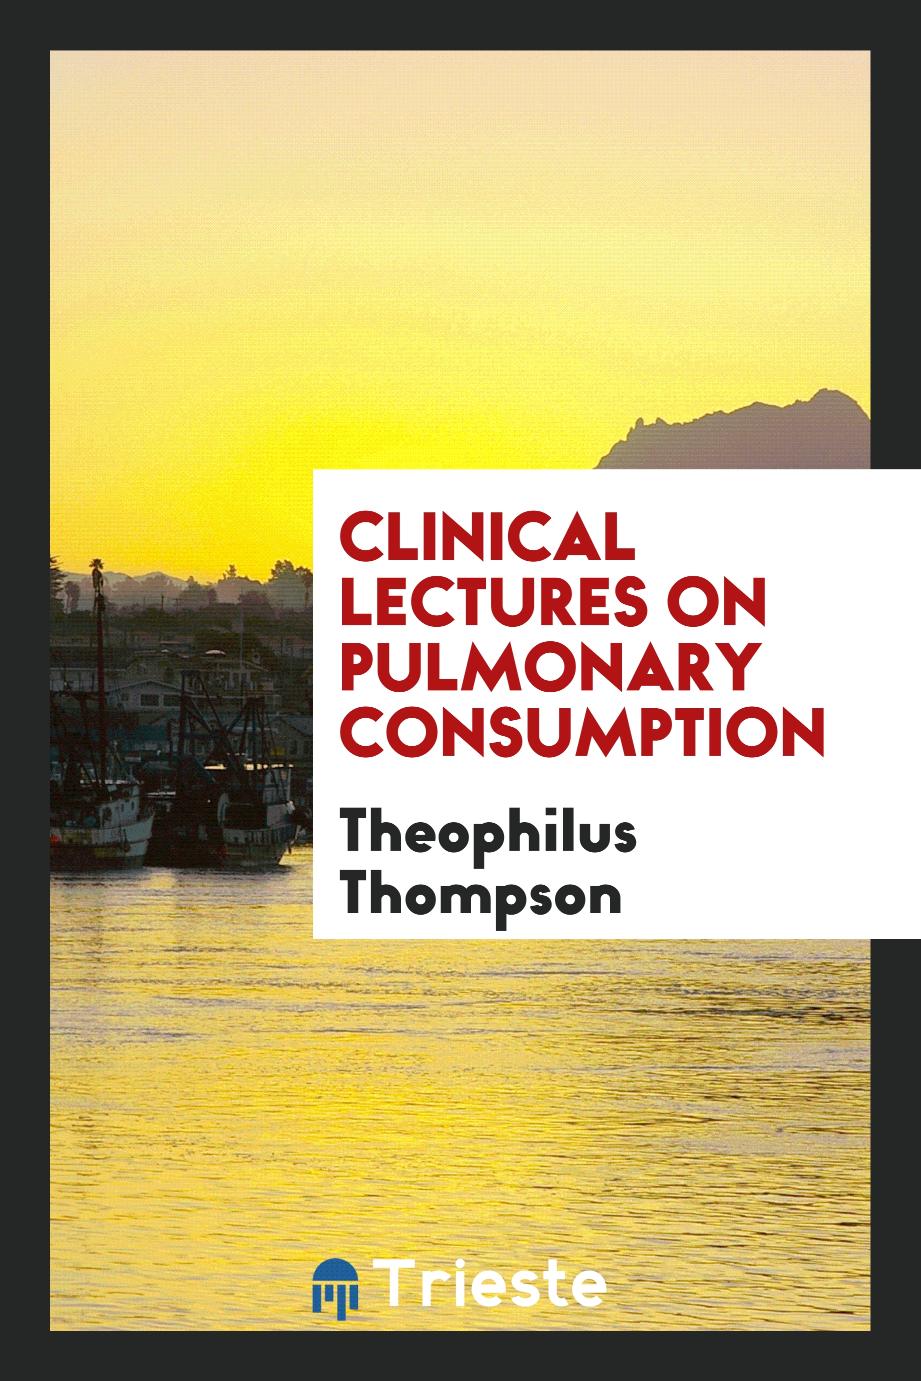 Clinical Lectures on Pulmonary Consumption